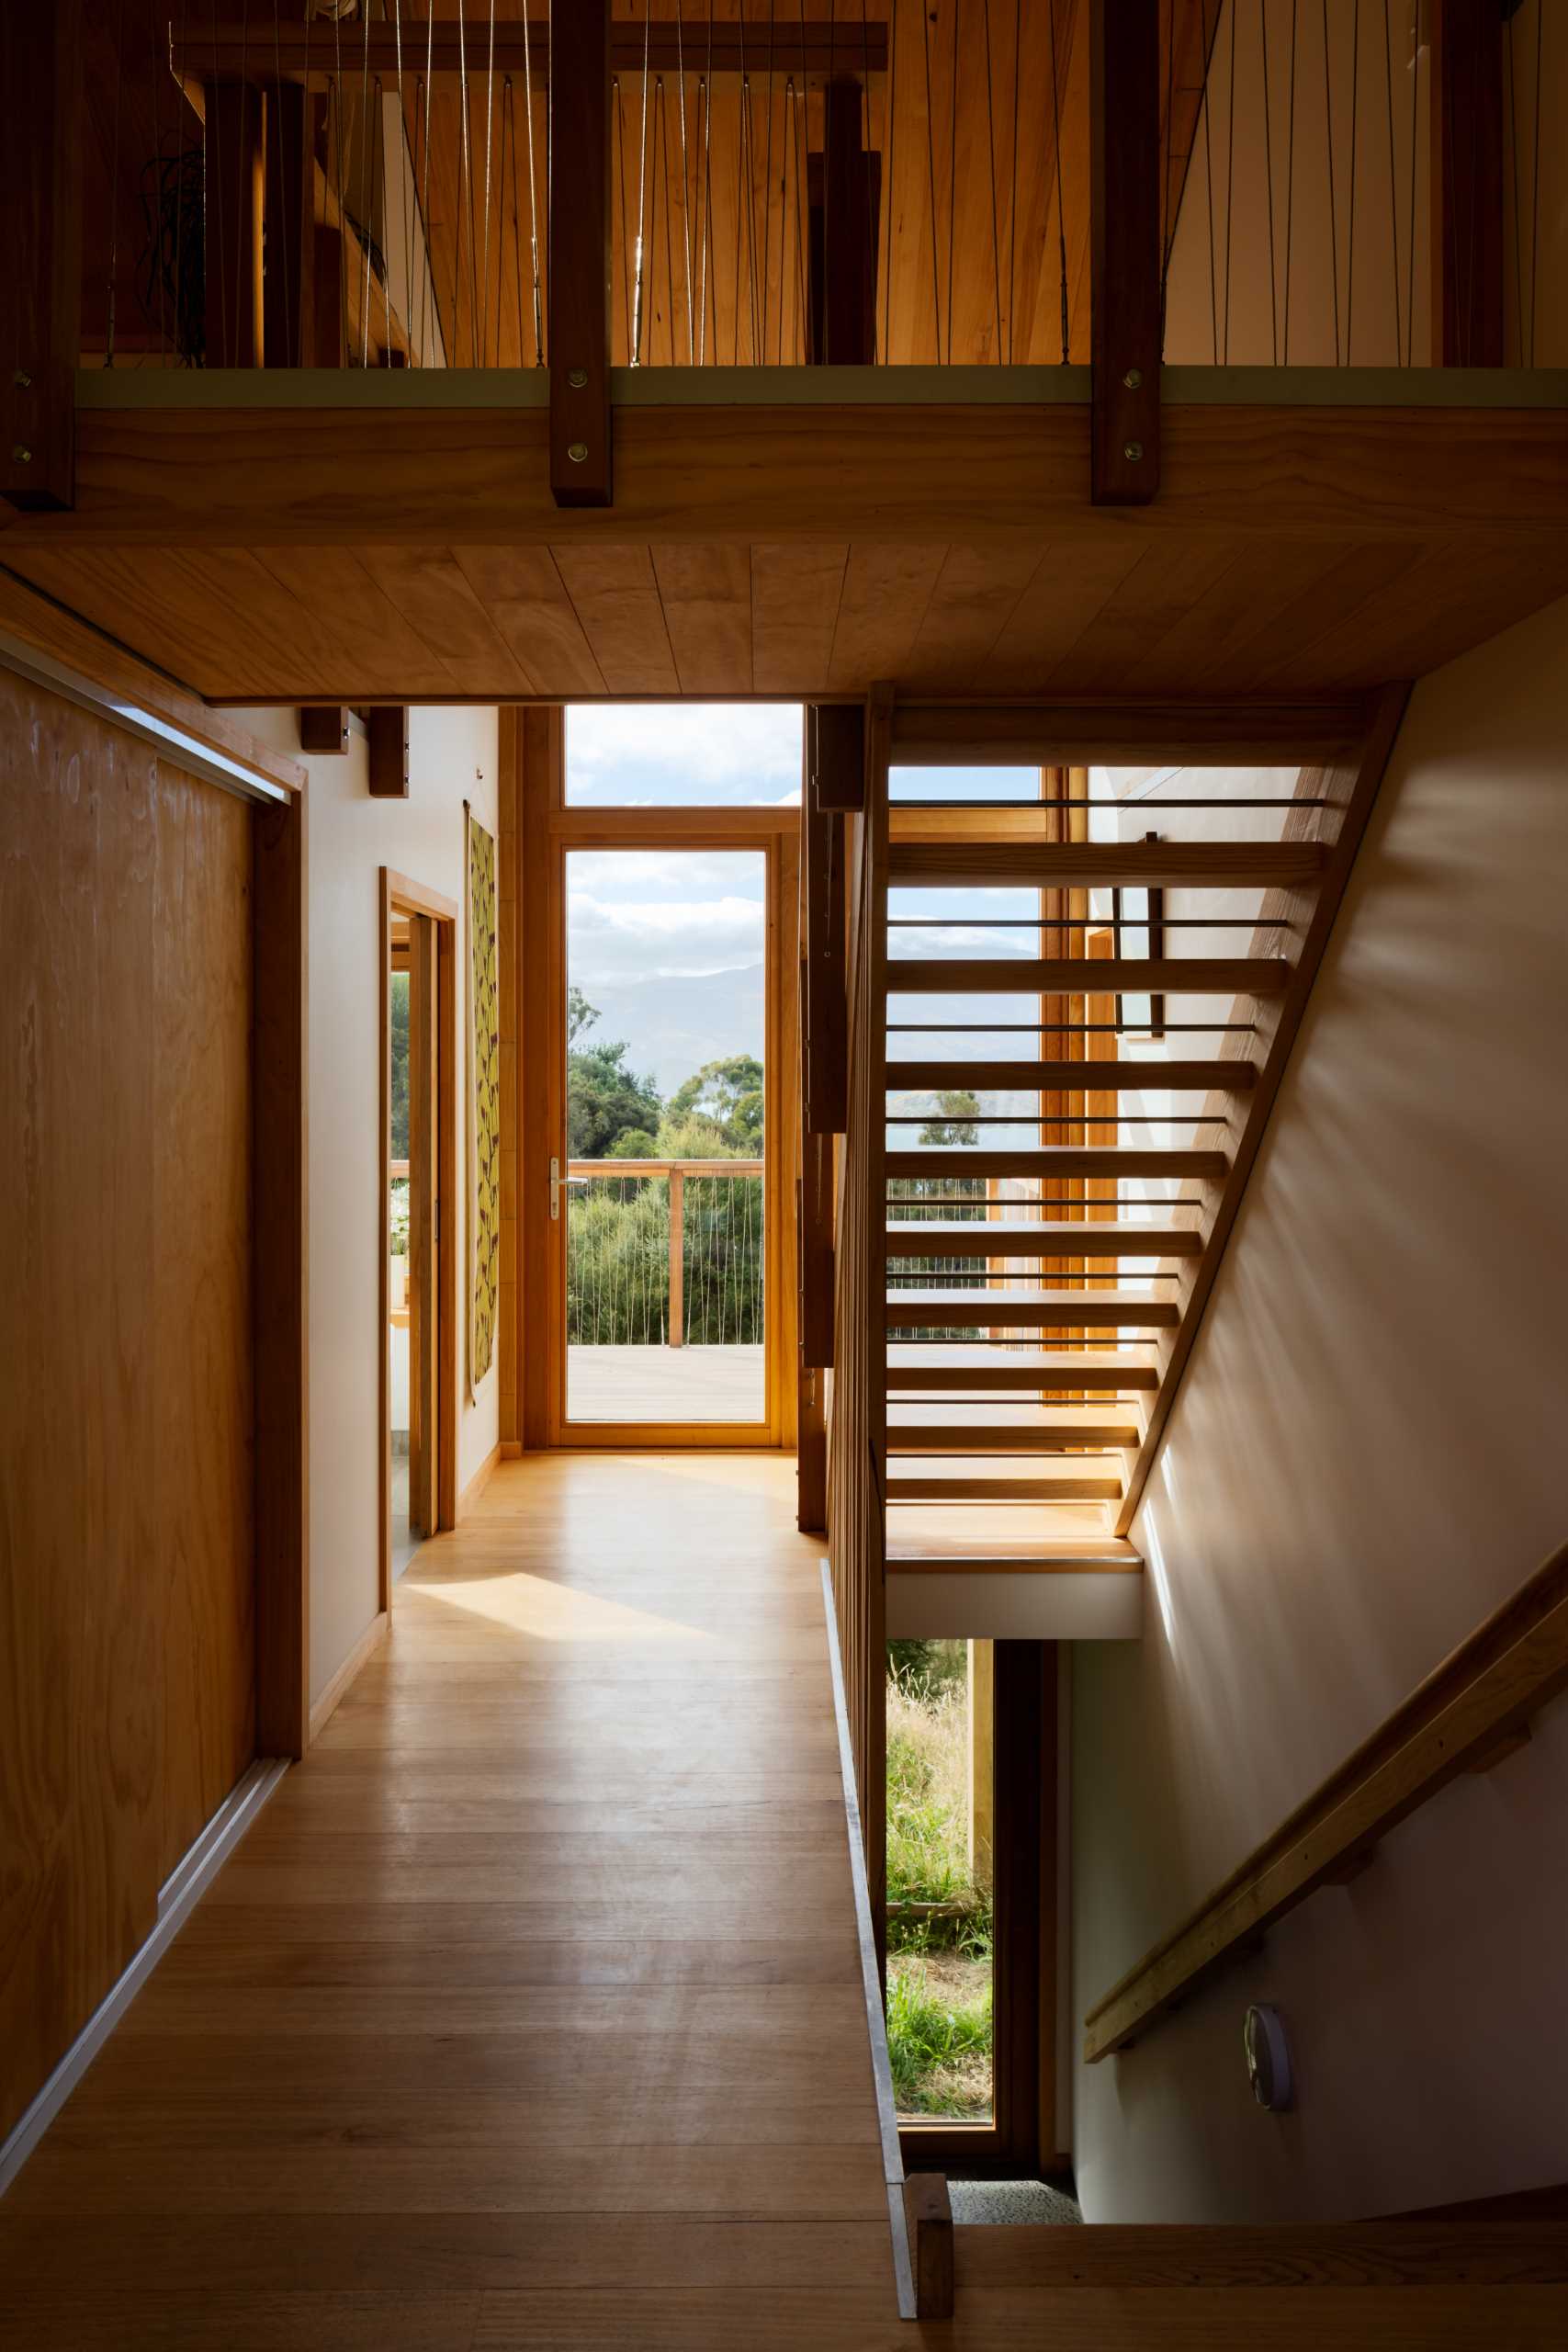 Wood stairs lead to a lofted home office, as well as the garage downstairs.